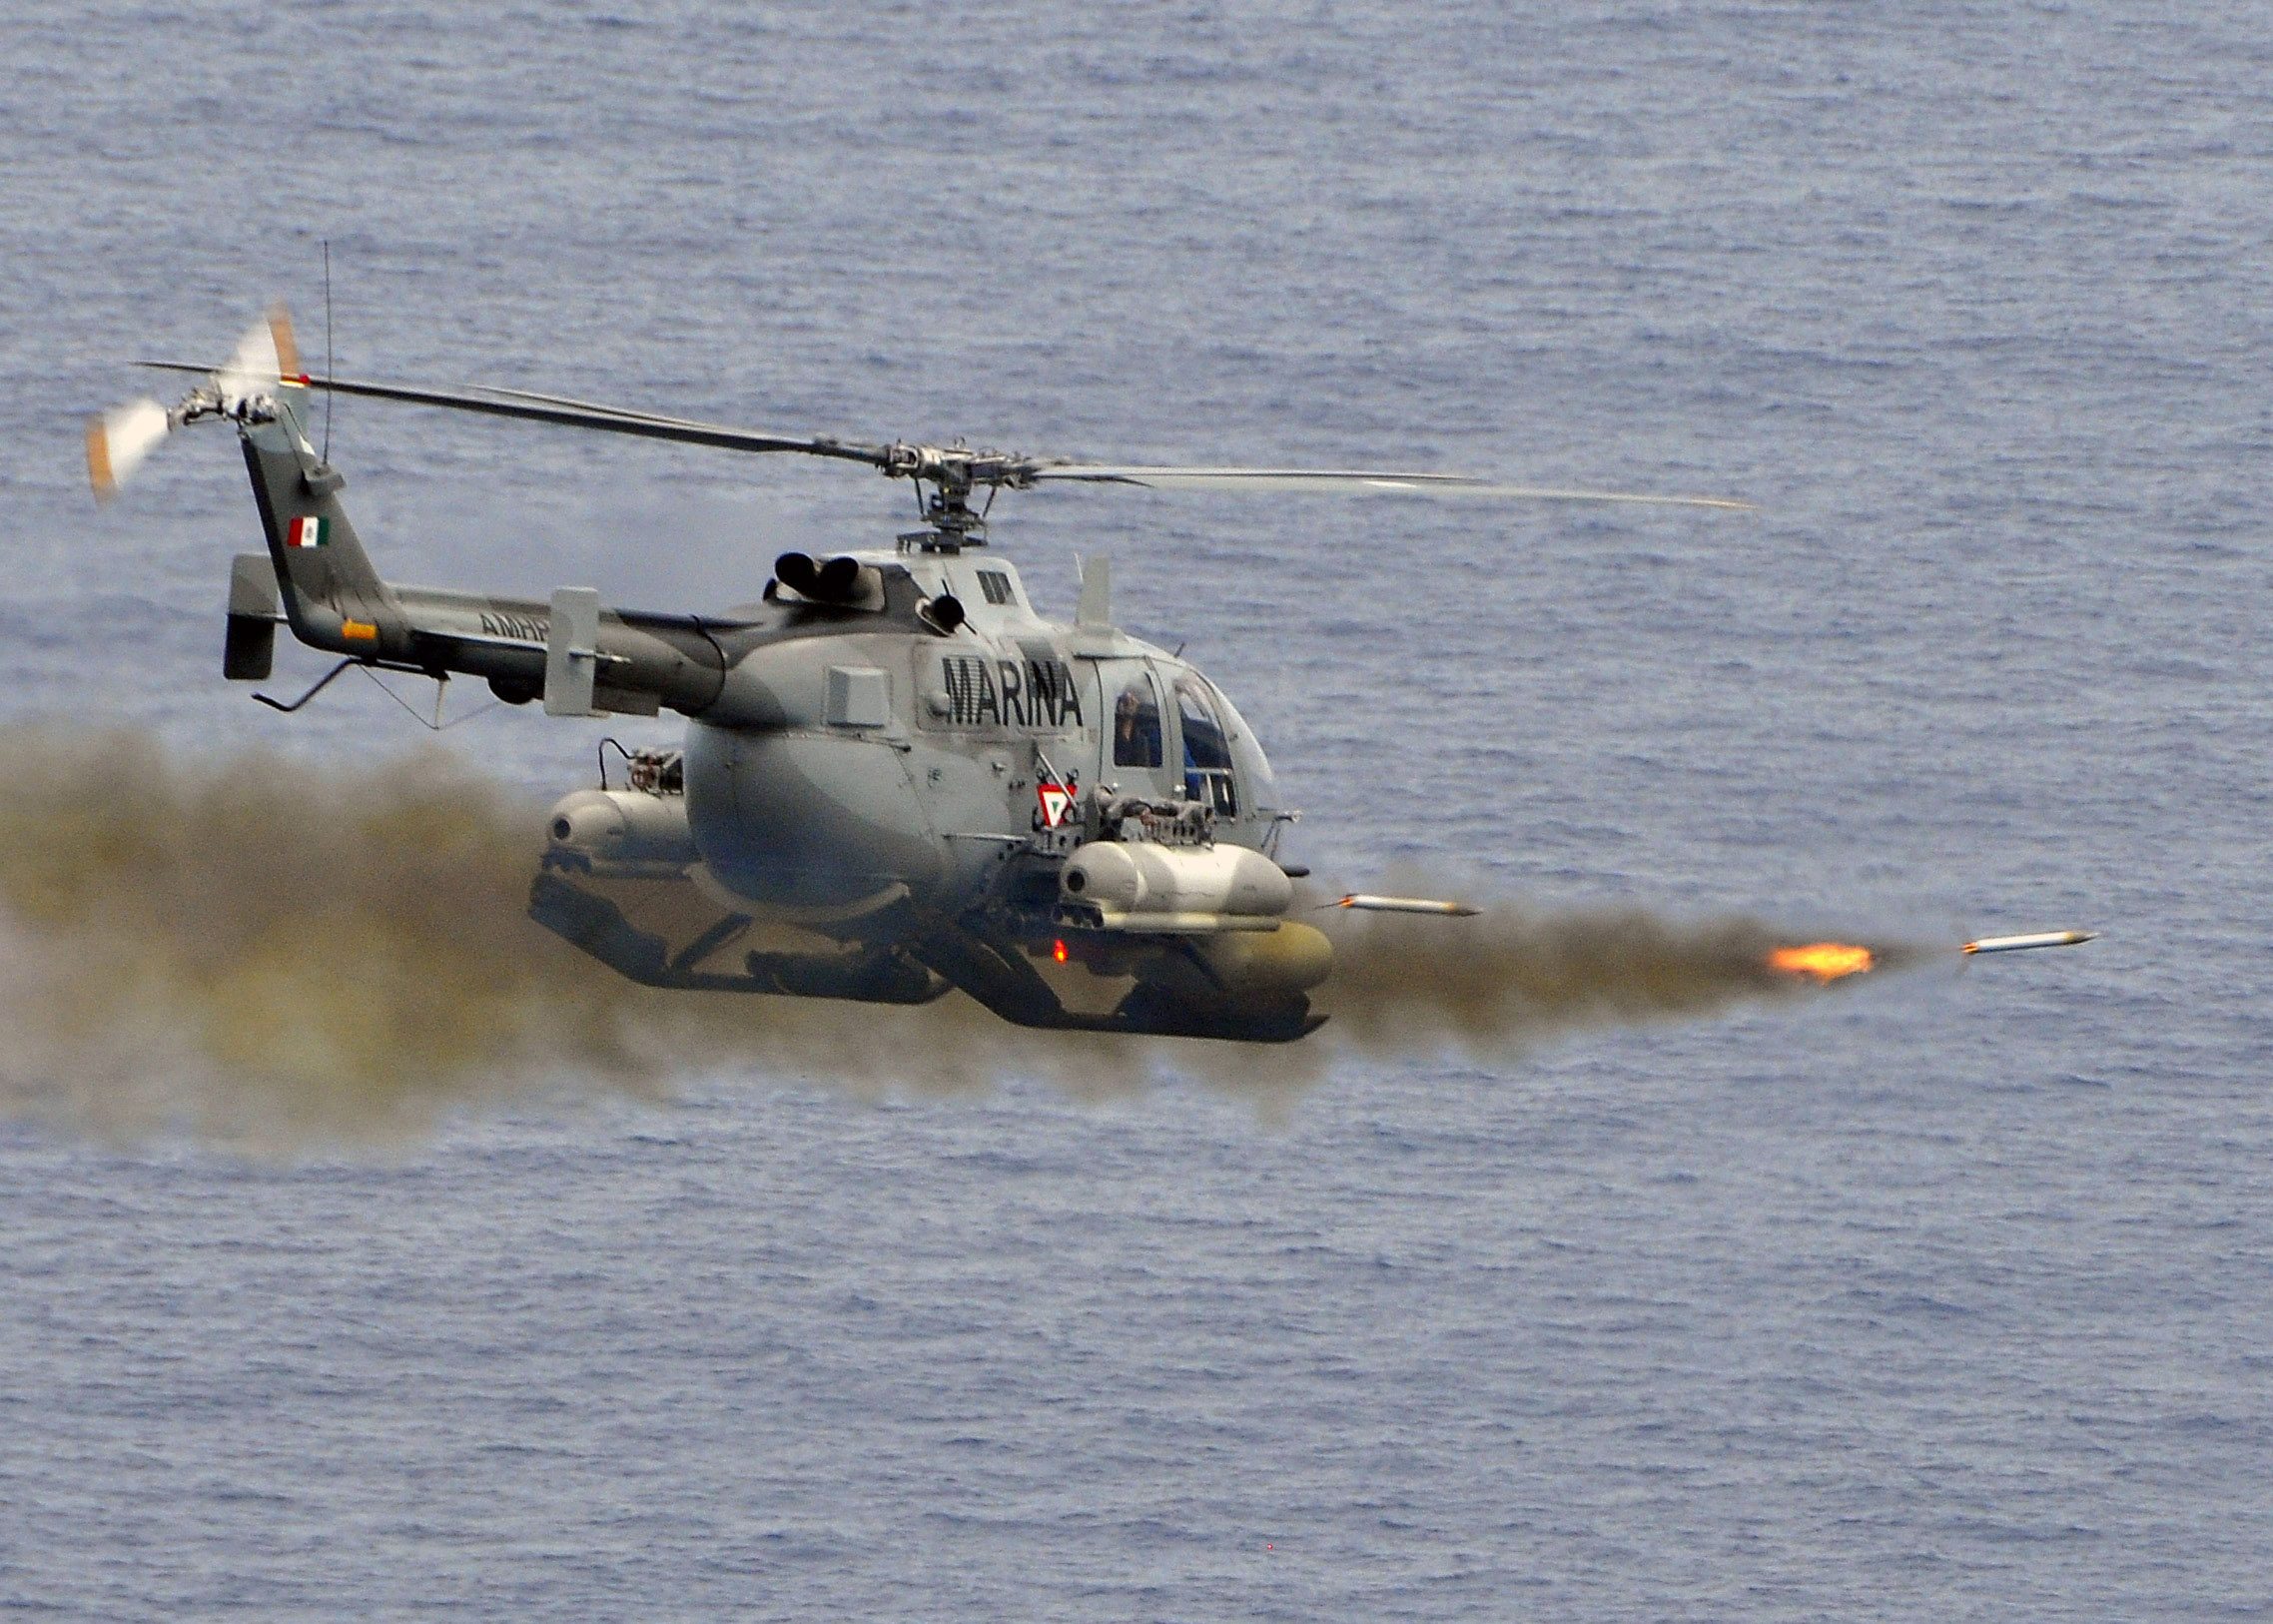 Mexican_BO-105_Bolkow_helicopter_fires_2.75_inch_high-explosive_rockets_at_the_ex-USS_Connolly_(DD_979).jpg